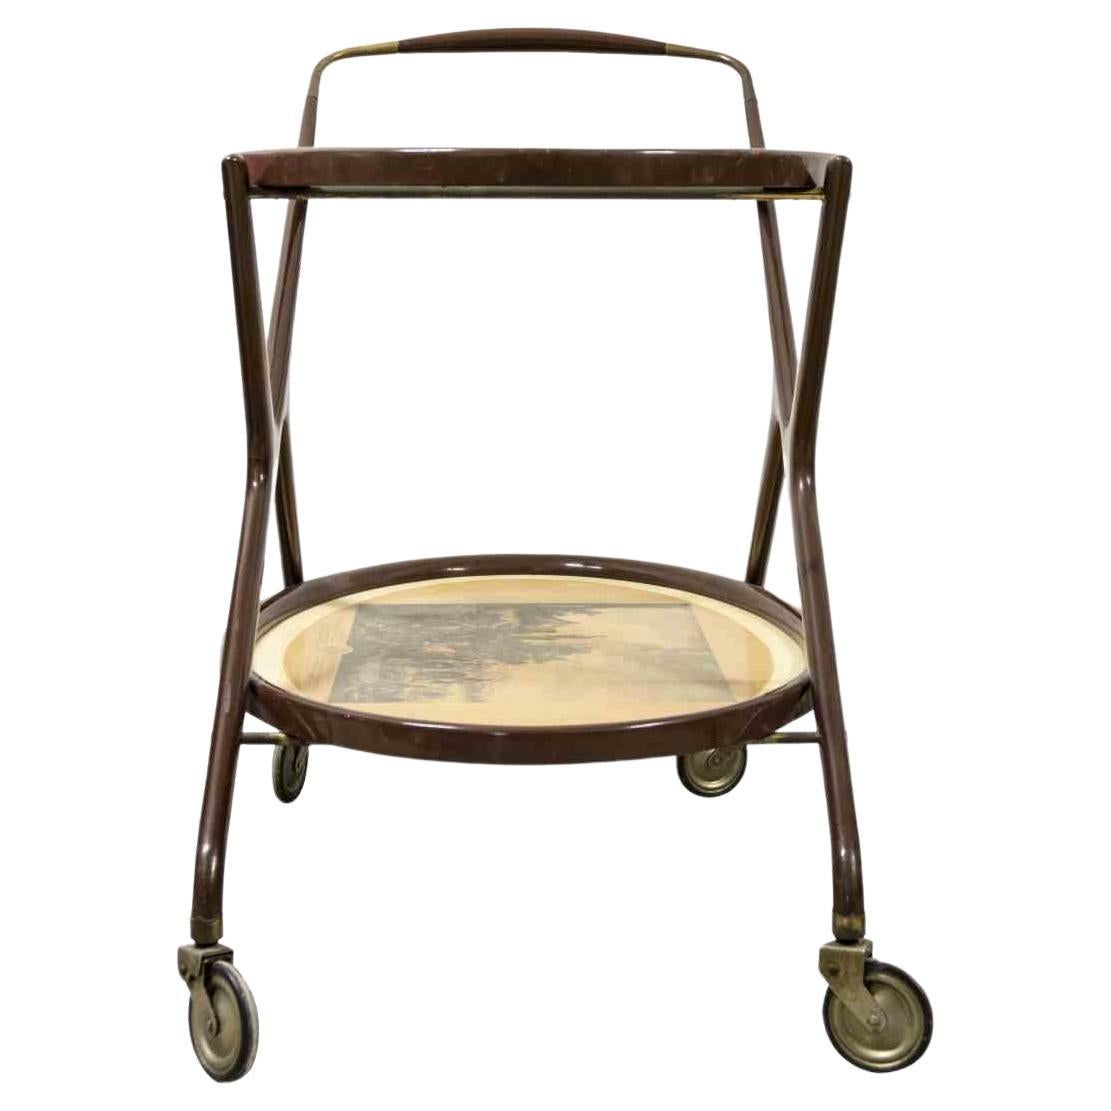 Vintage Cart is an original design item attributed to the Italian designer Cesare Lacca in the 1950s.

A wooden brass bar cart with shelves glass. The serving cart has a lithograph on the base. 

Rare and good conditions. 

Serve your drinks